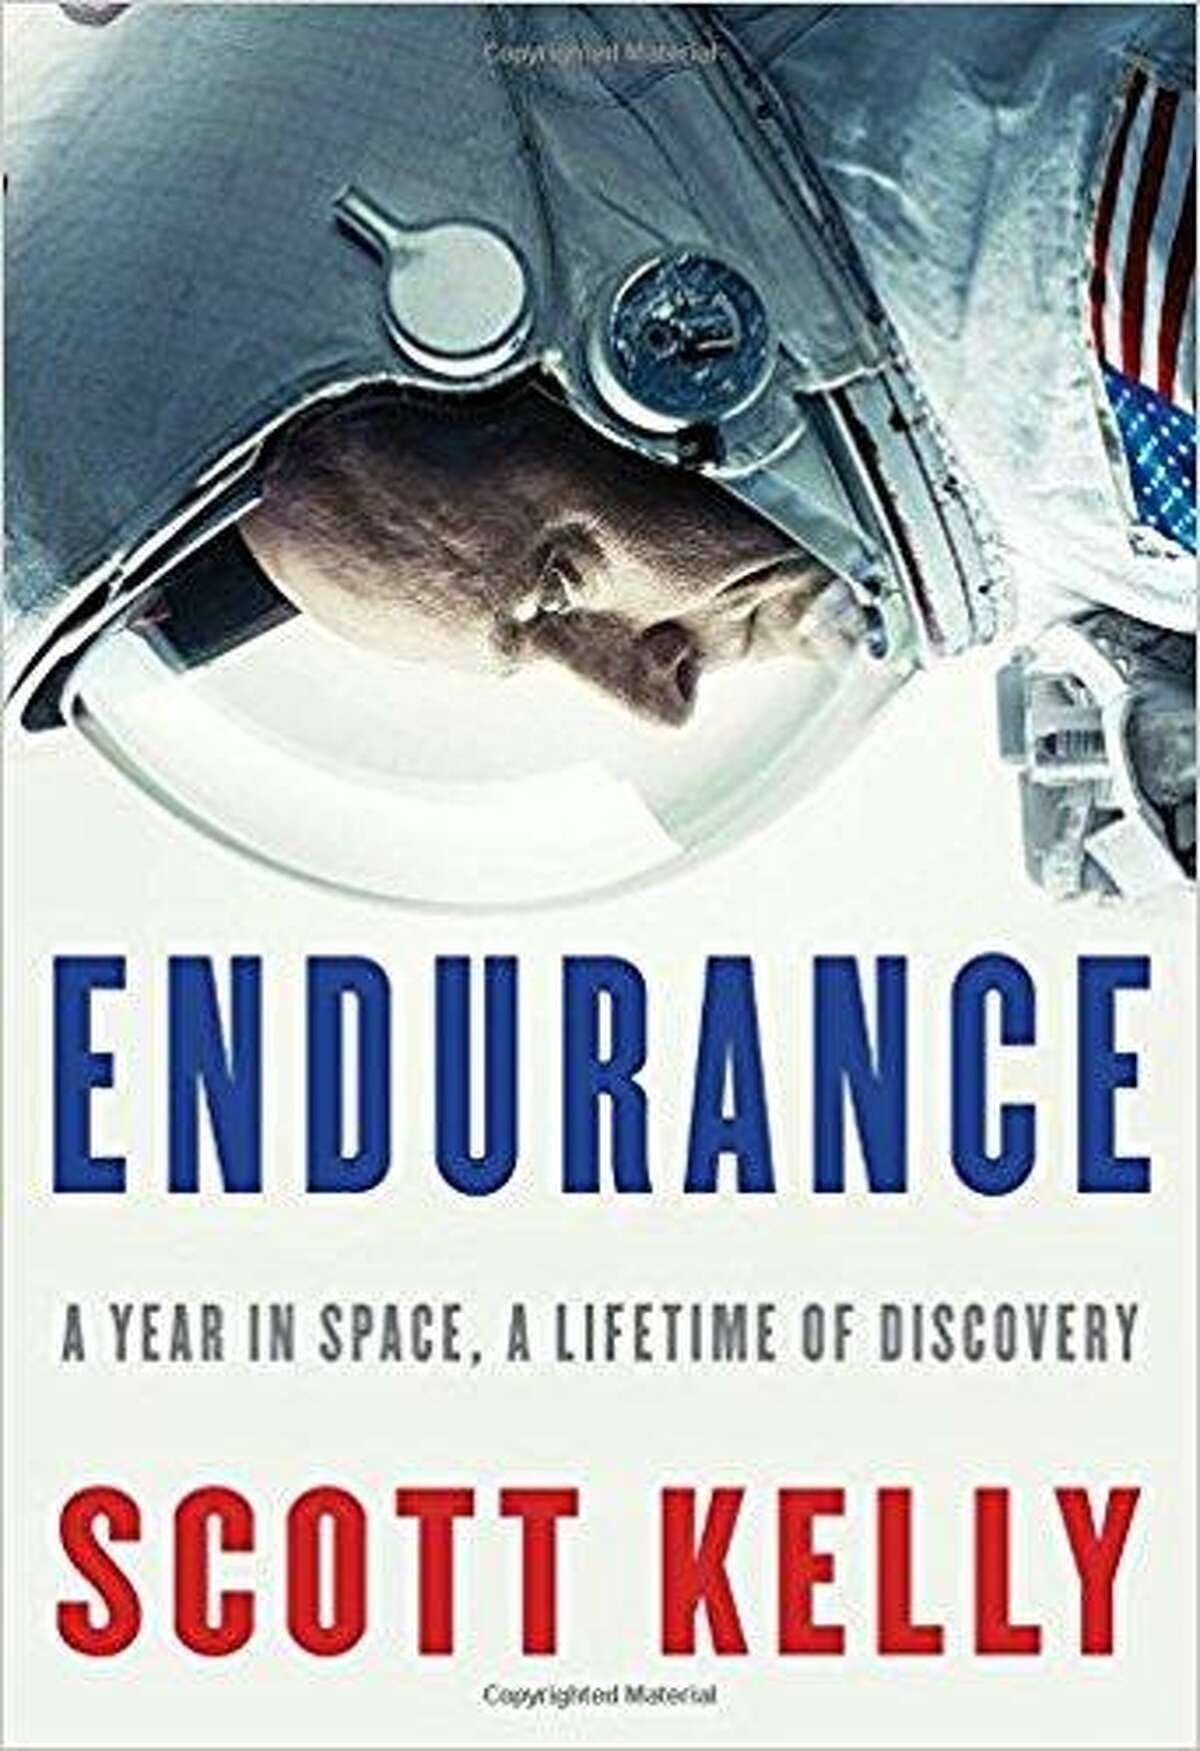 “Endurance: A Year in Space, A Lifetime of Discovery” by Scott Kelly